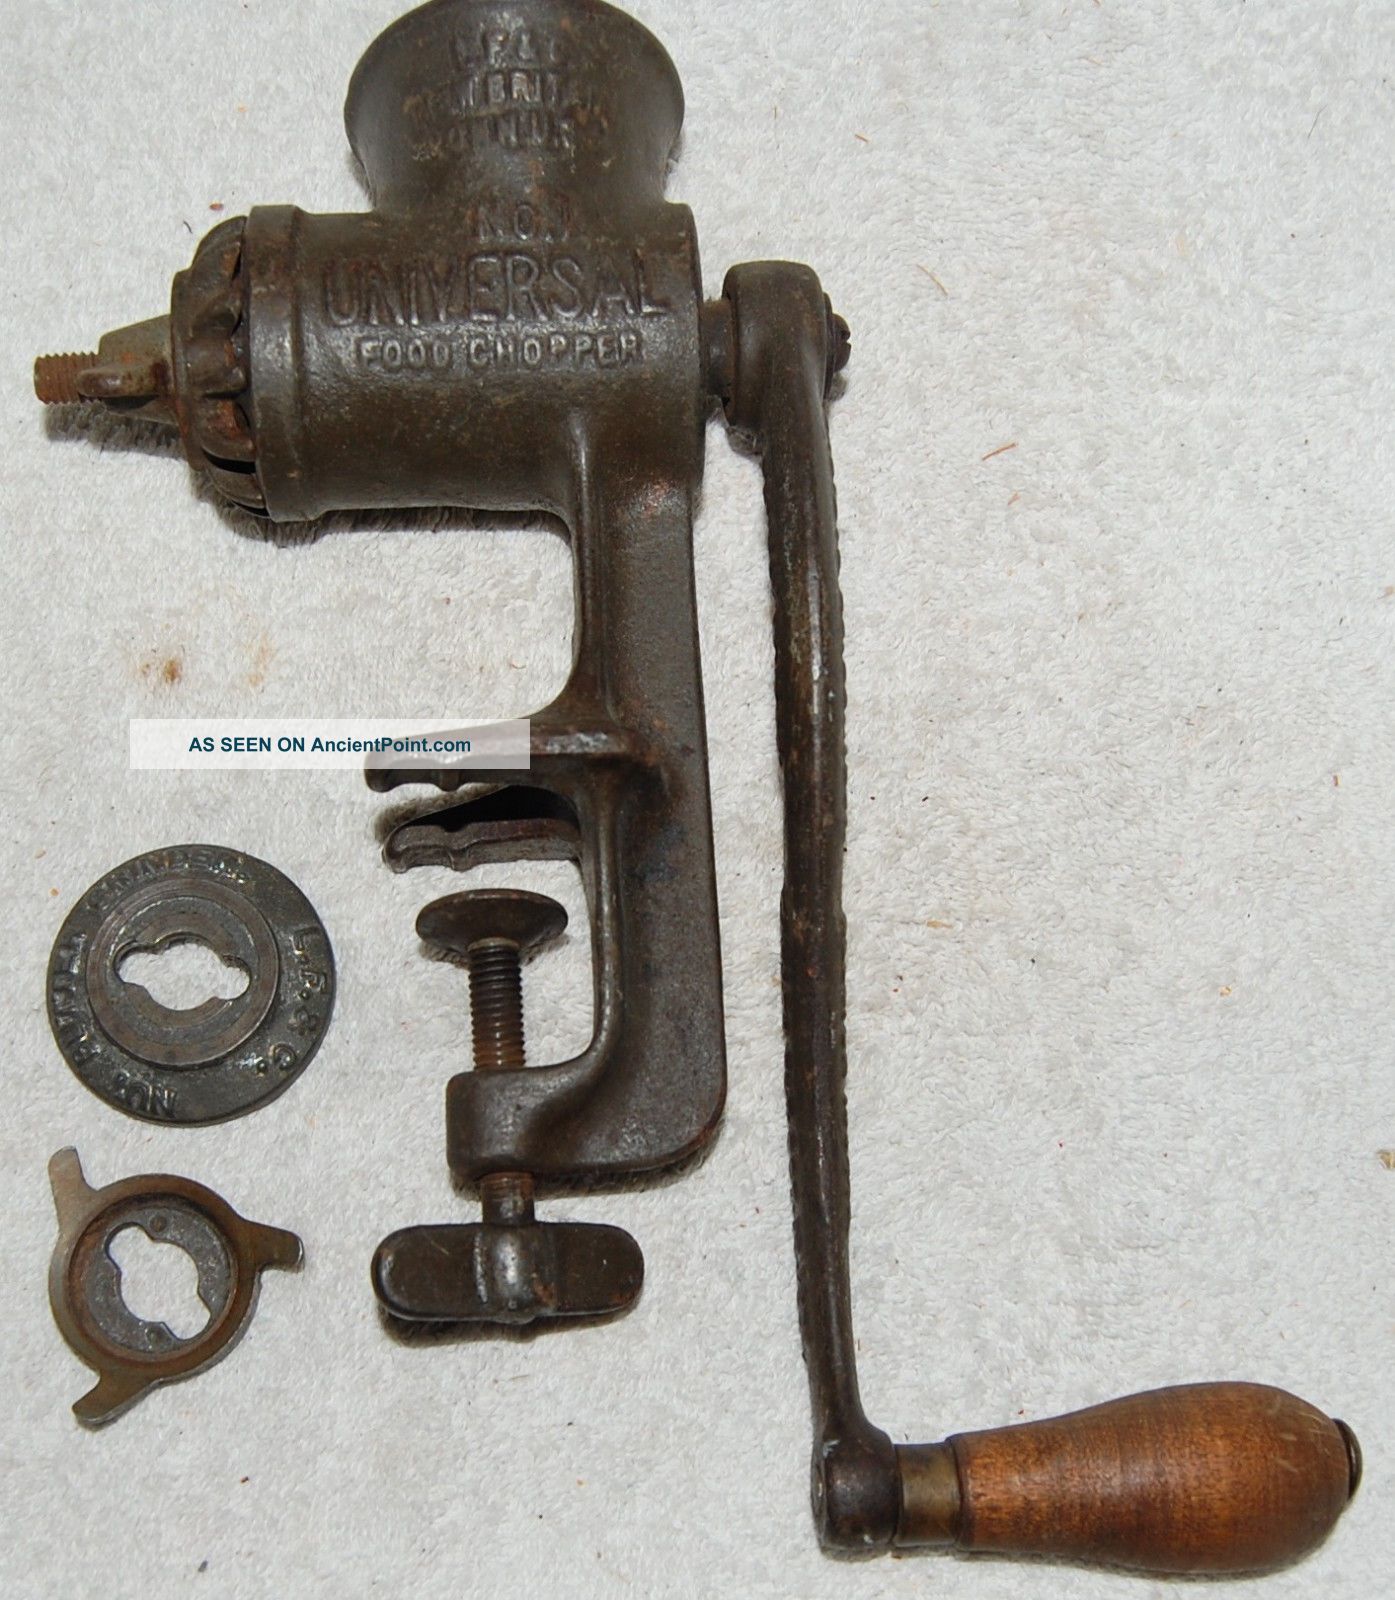 Antique 1897 Universal No 1 Food Chopper Hand Meat Grinder Great Britain Ct Usa Meat Grinders photo